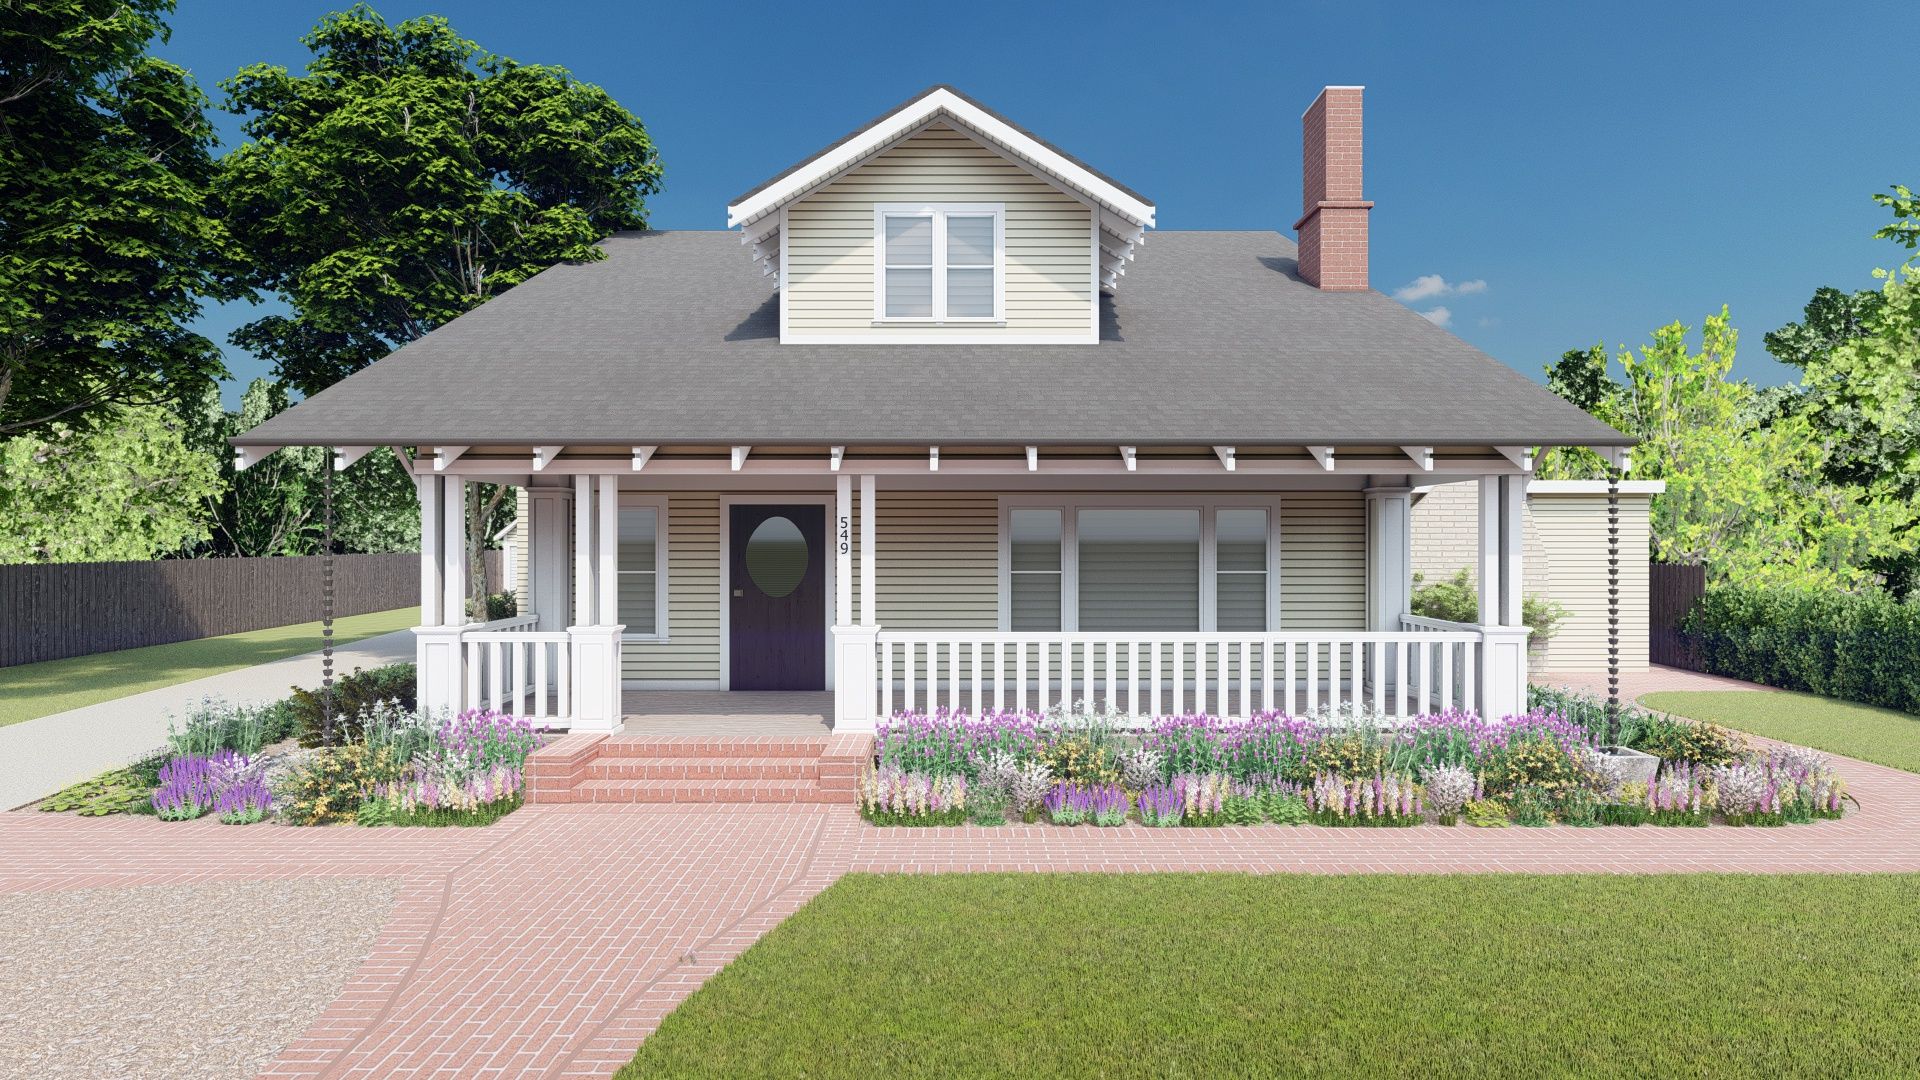 a charming front yard with classic landscaping around a front porch. a brick front walkway next to a driveway